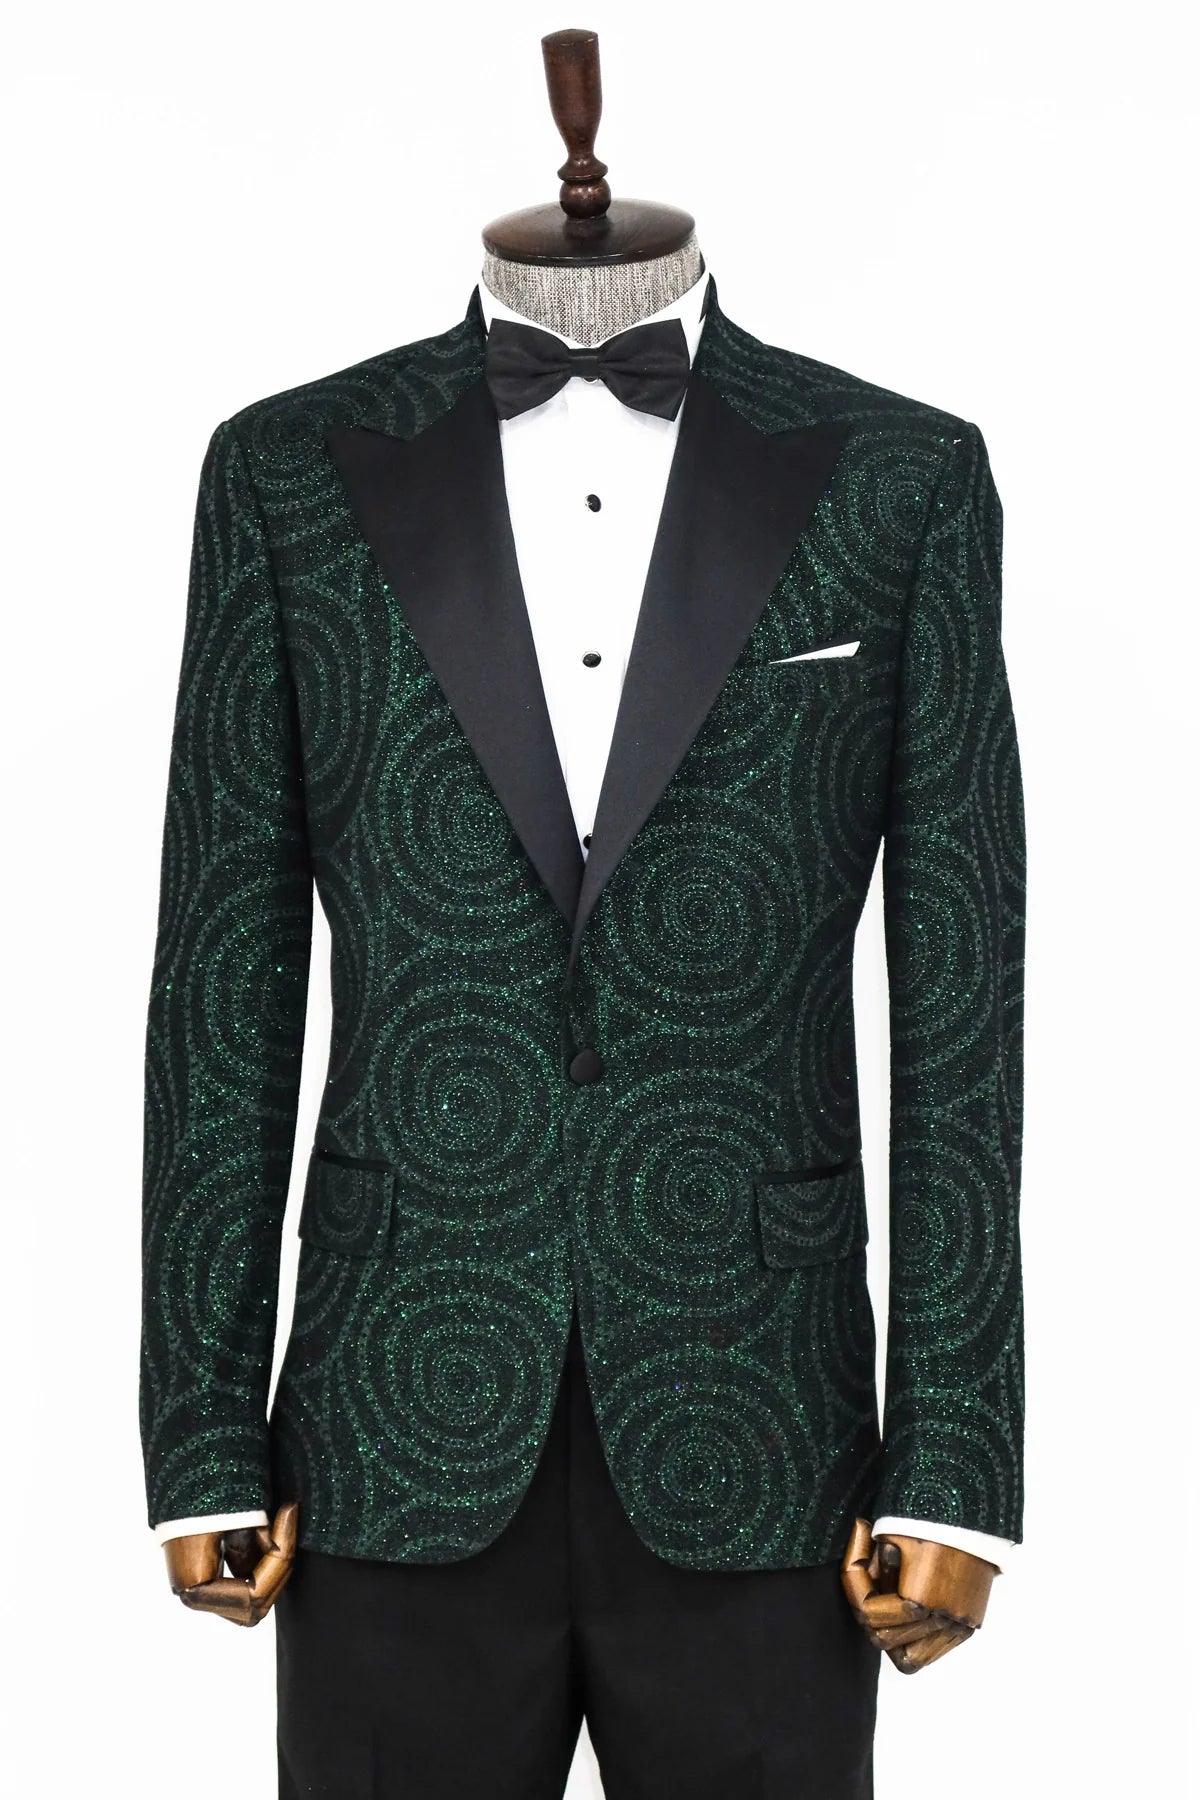 Hypnose Pattern Peak Lapel Slim Fit Green Men Prom Blazer, perfect for proms and other formal events, available exclusively at KCT Menswear.